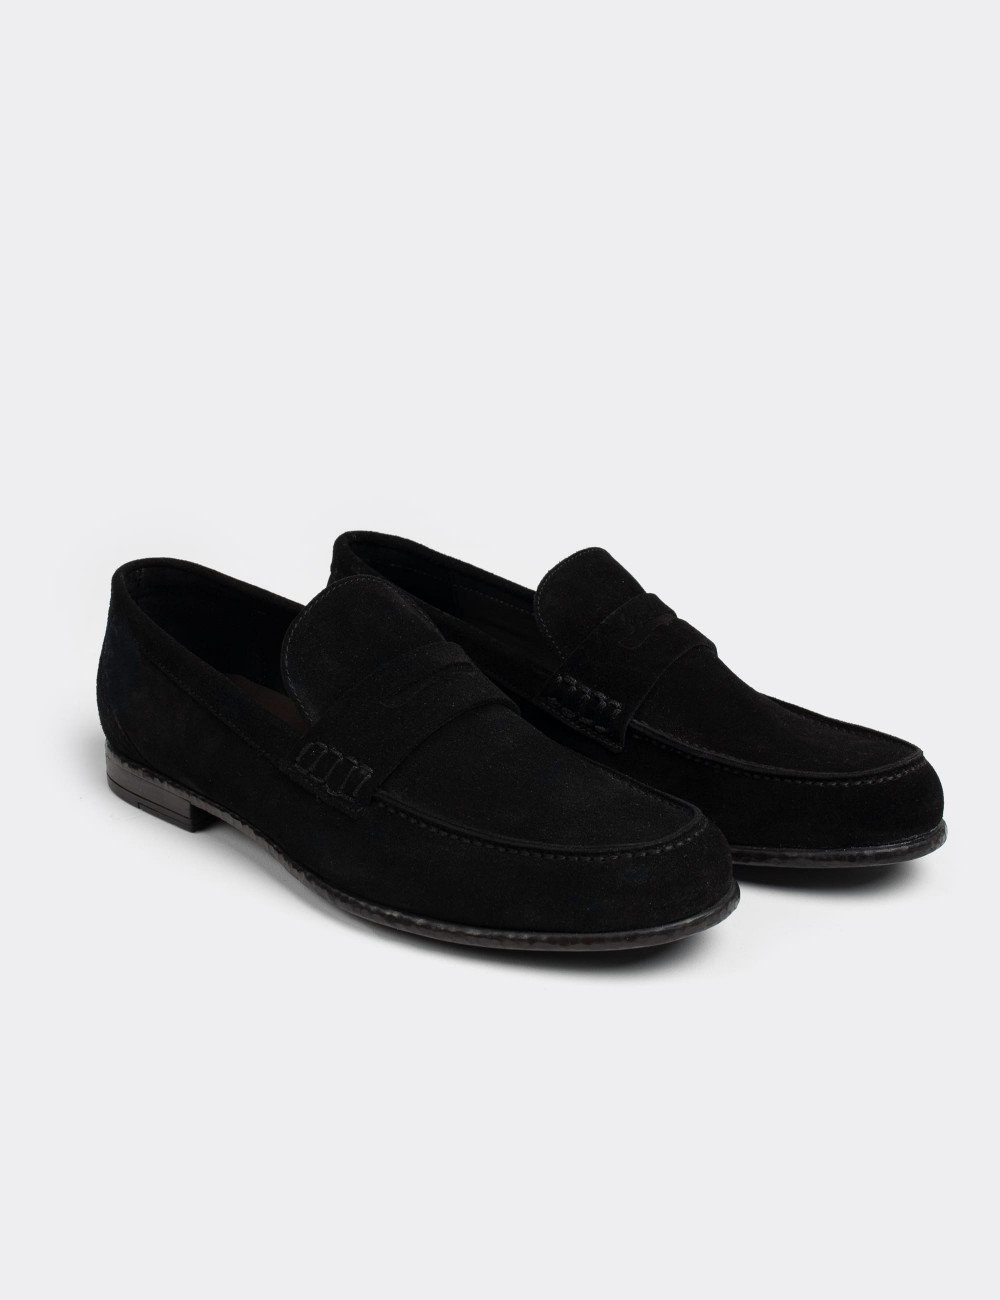 Black Suede Leather Loafers - 01714MSYHC01